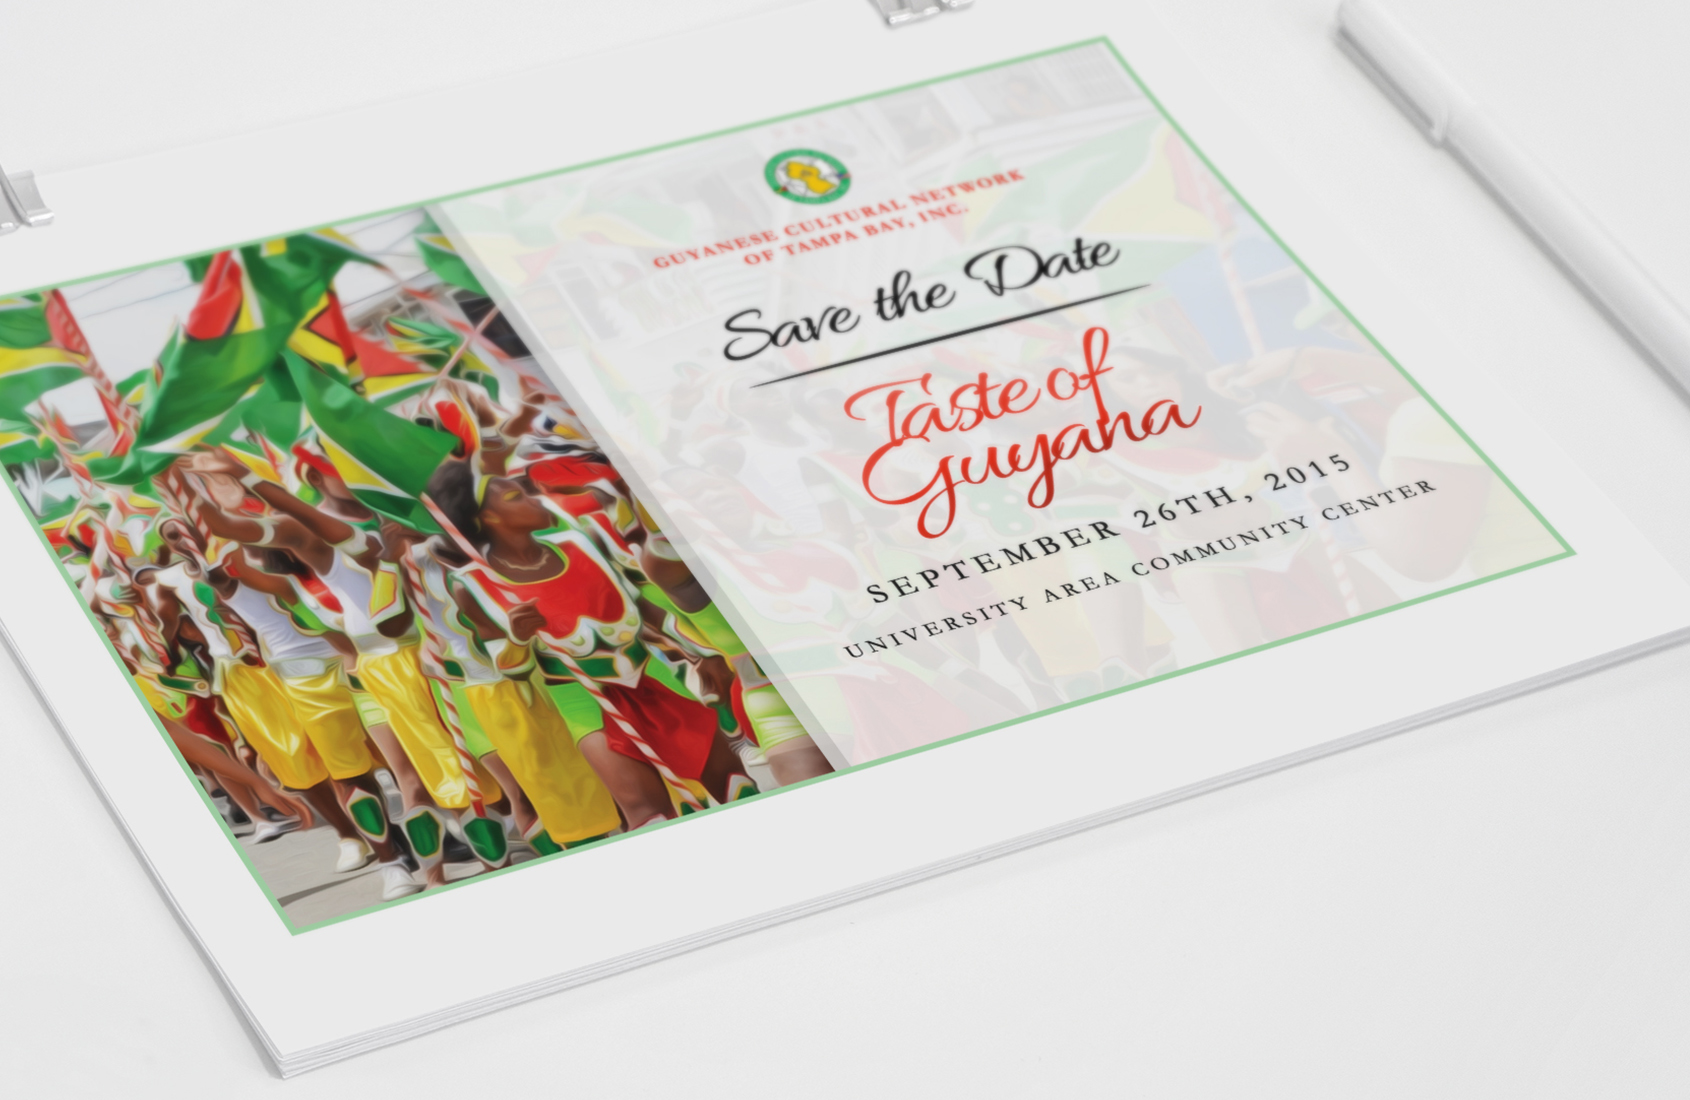 GCNTB Taste of Guyana 2015 Save the Date